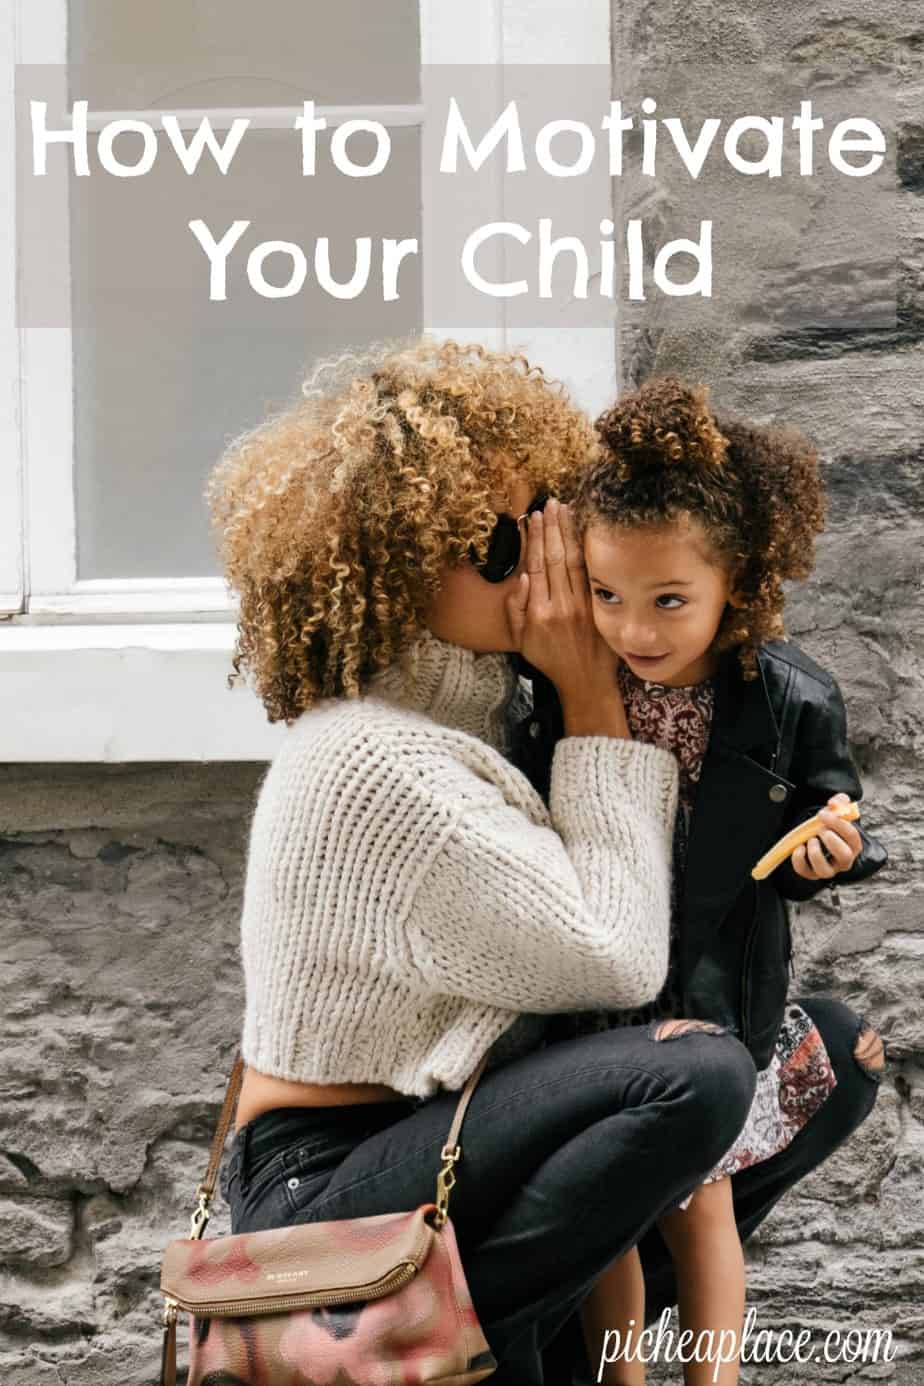 If you have children, you know how difficult it can be at times to get them to do the things they should. Between after school activities, video games, cell phones, and computers, motivating your kids to take care of their household chores and other responsibilities can be a real challenge. Here are a few tips on how to motivate your child effectively...